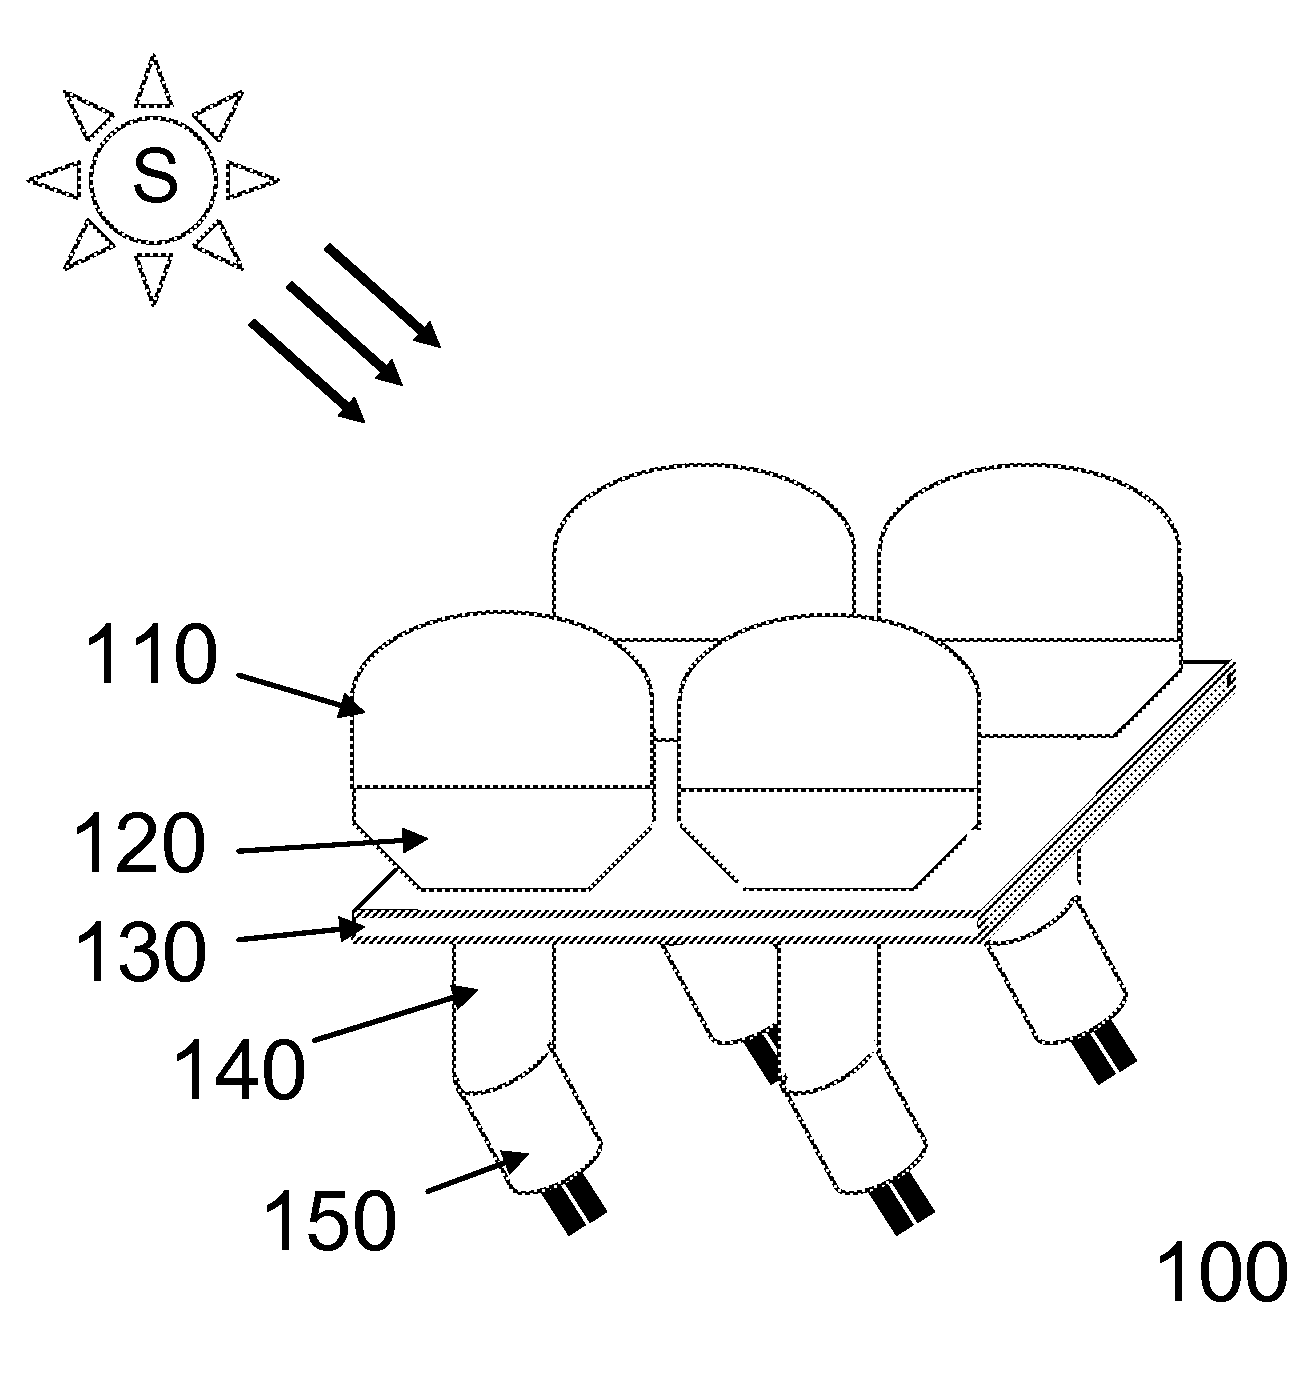 Solar-To-Electricity Conversion System